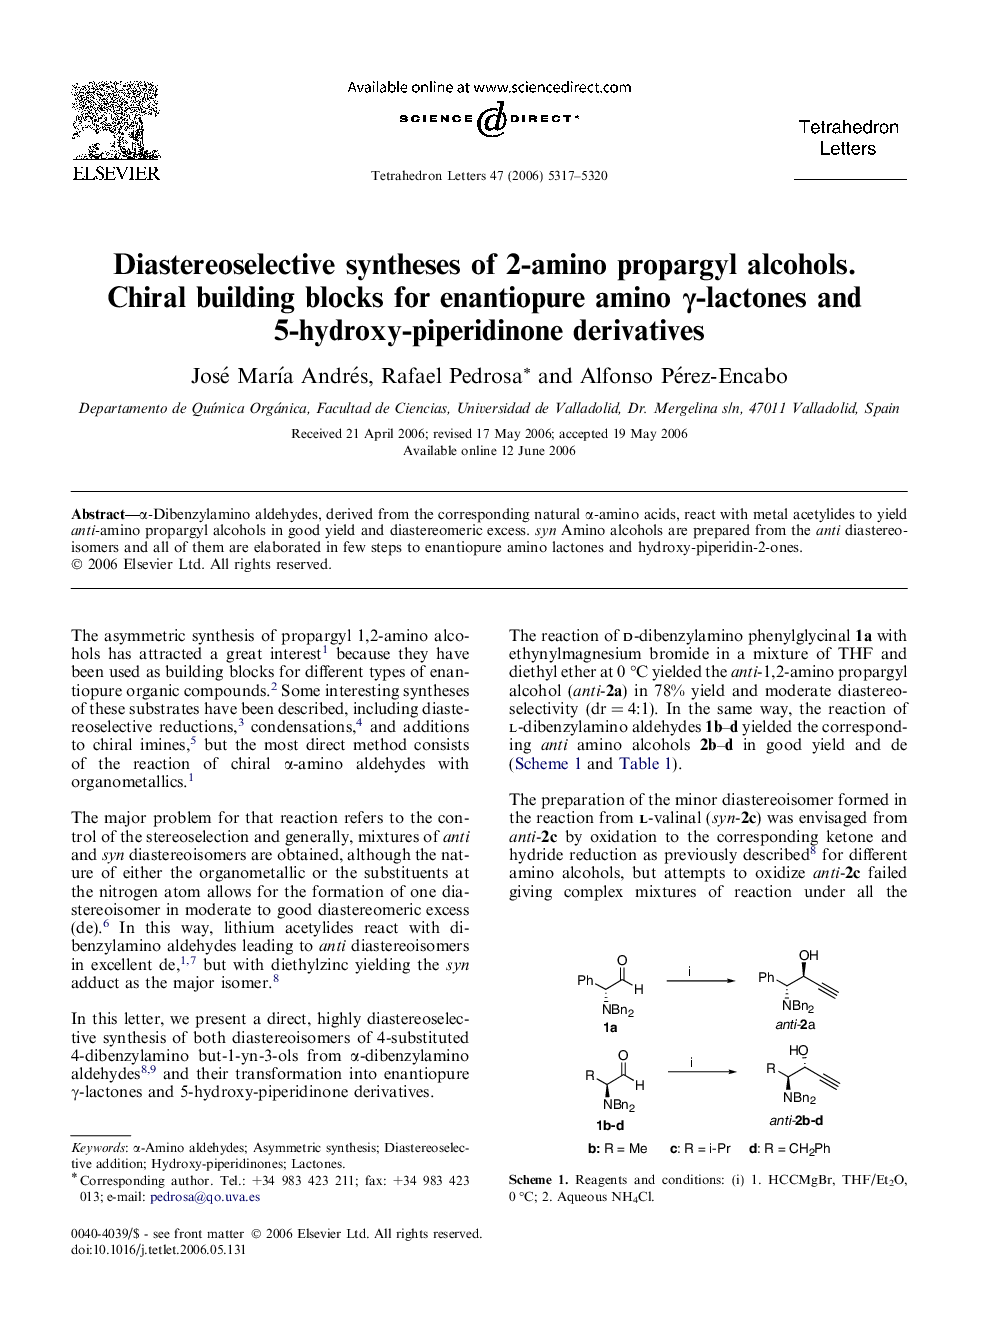 Diastereoselective syntheses of 2-amino propargyl alcohols. Chiral building blocks for enantiopure amino Î³-lactones and 5-hydroxy-piperidinone derivatives